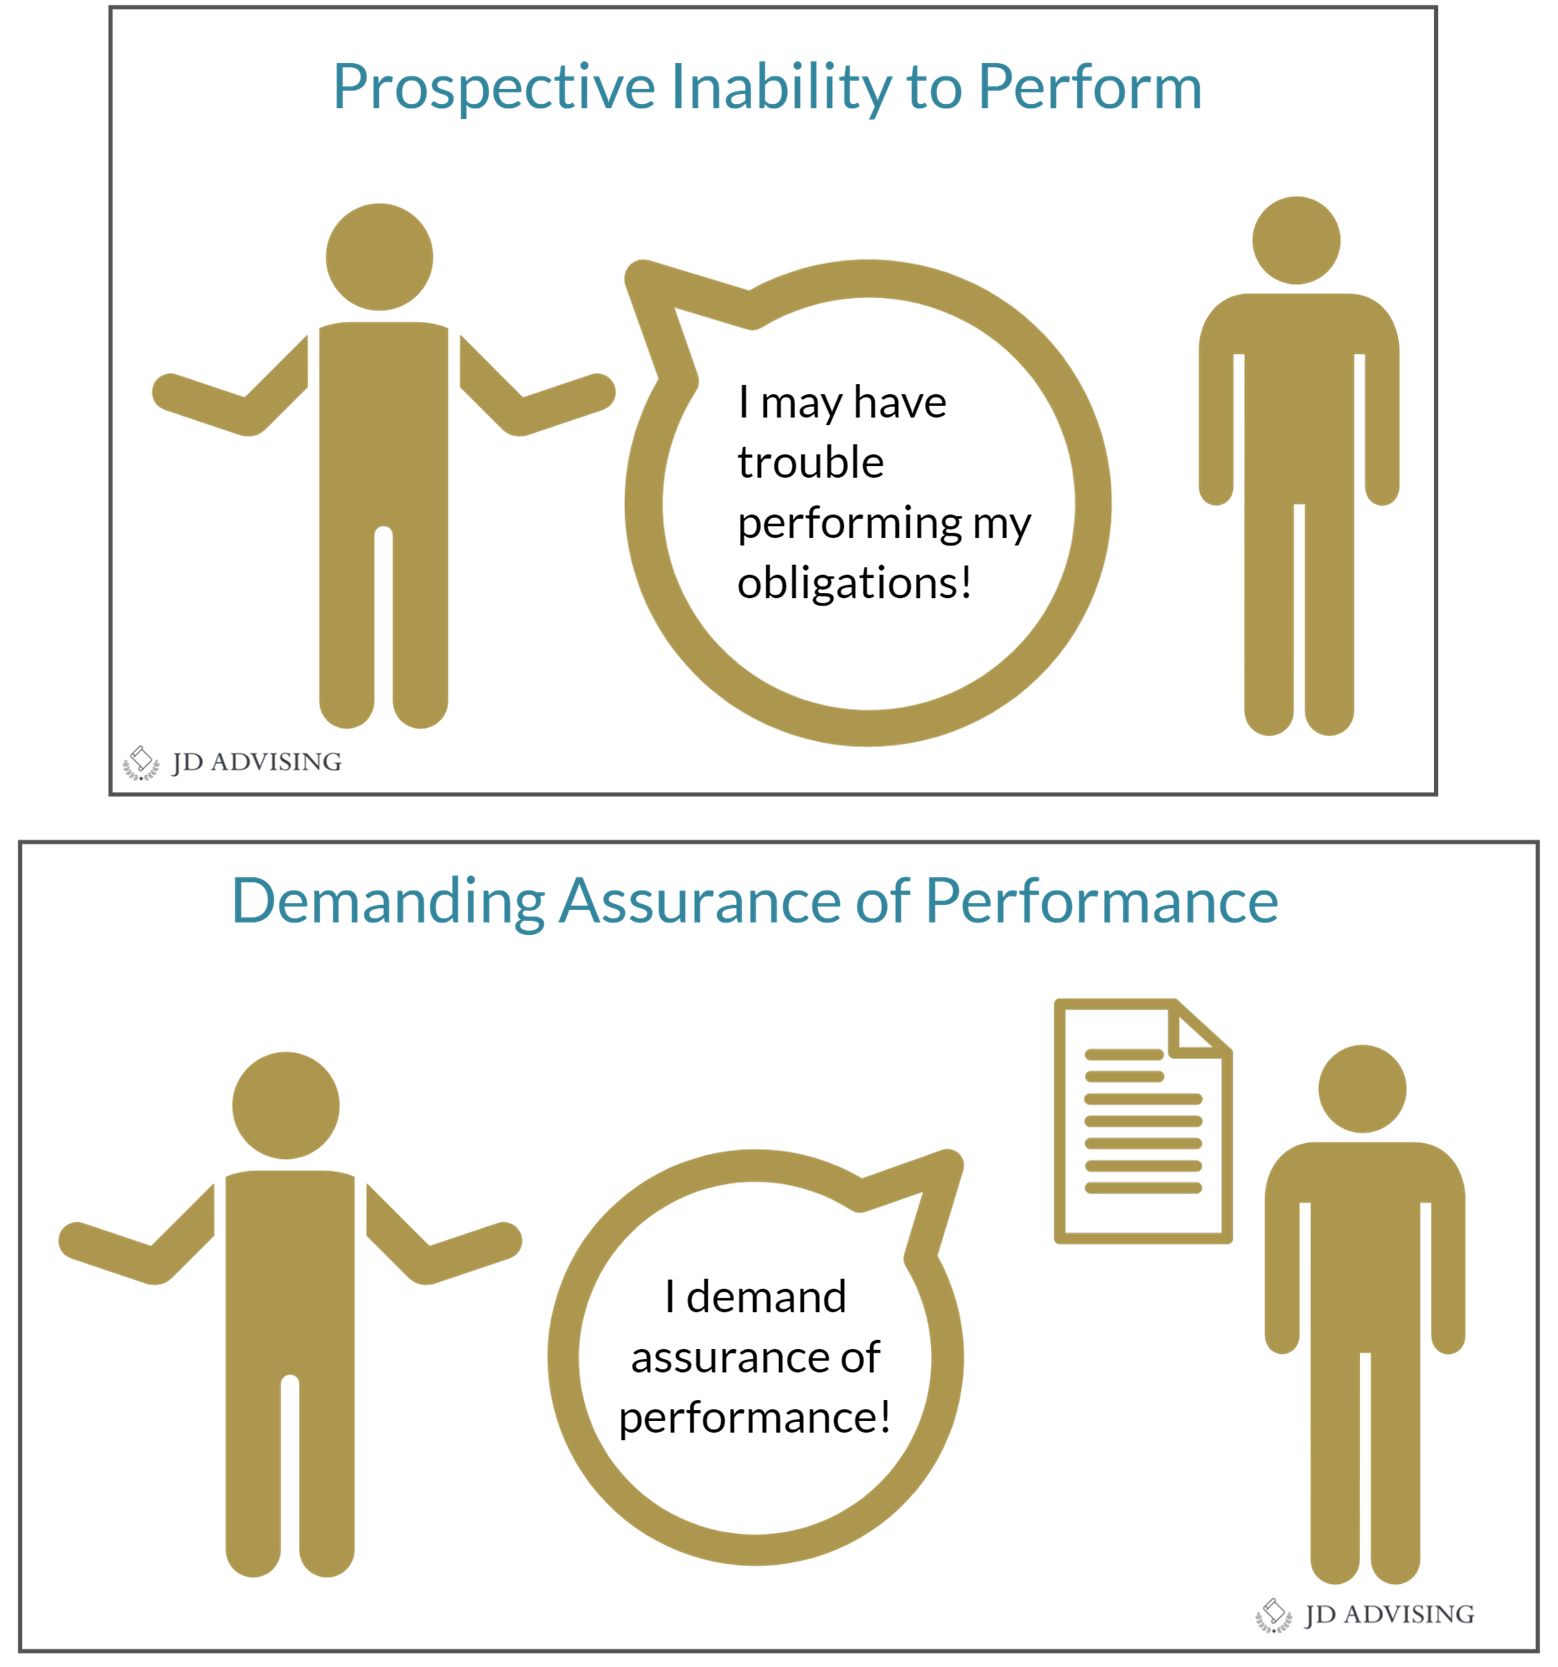 Prospective inability to perform and Demanding Assurance of Performance